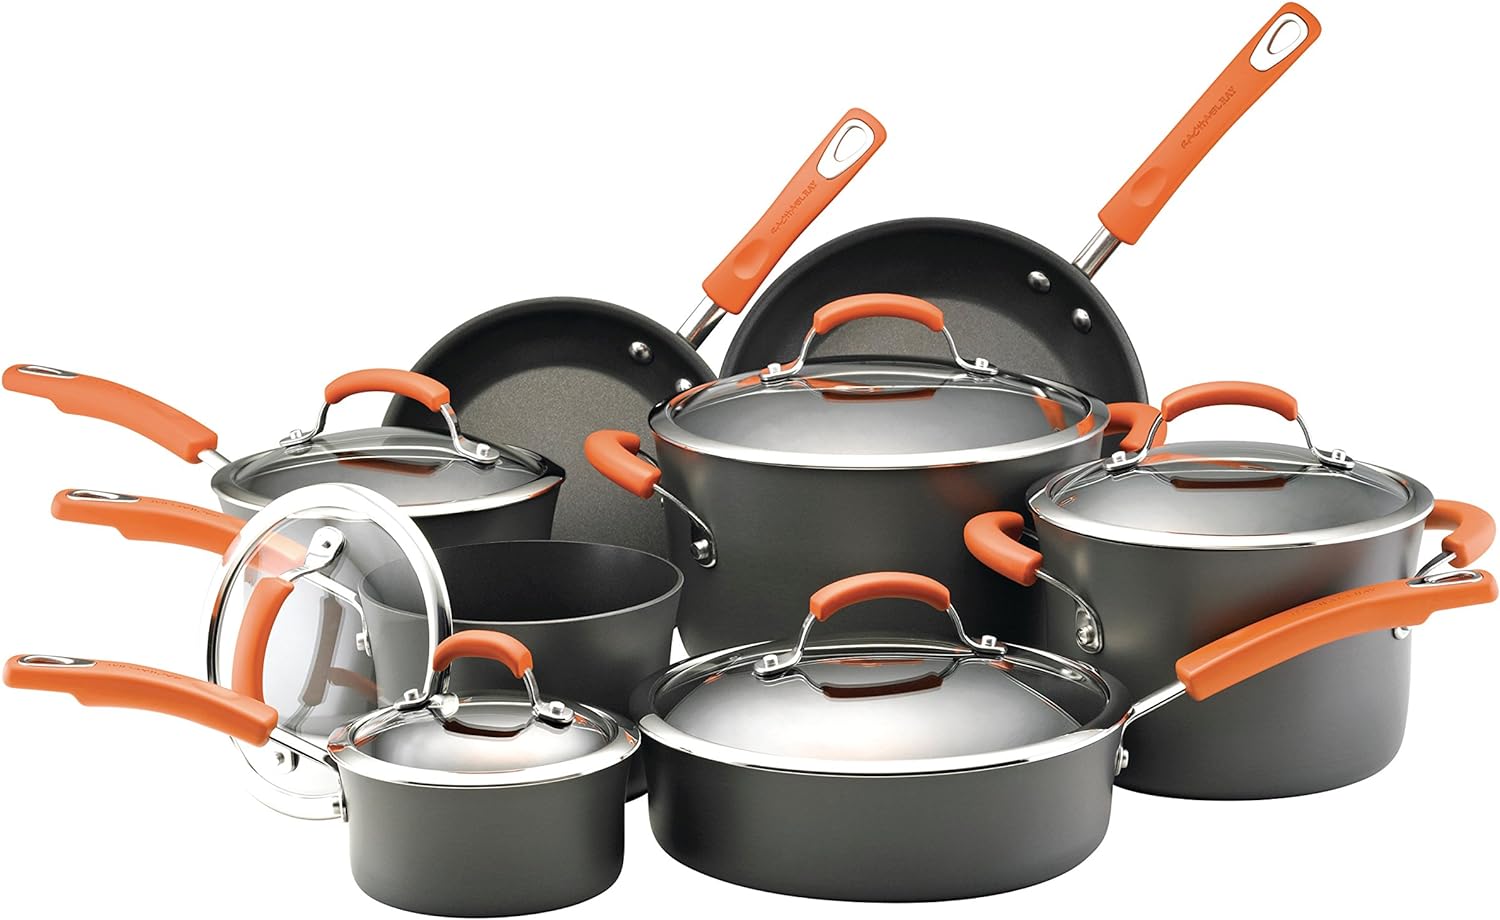 Rachael Ray Brights Hard Anodized Nonstick Cookware Set